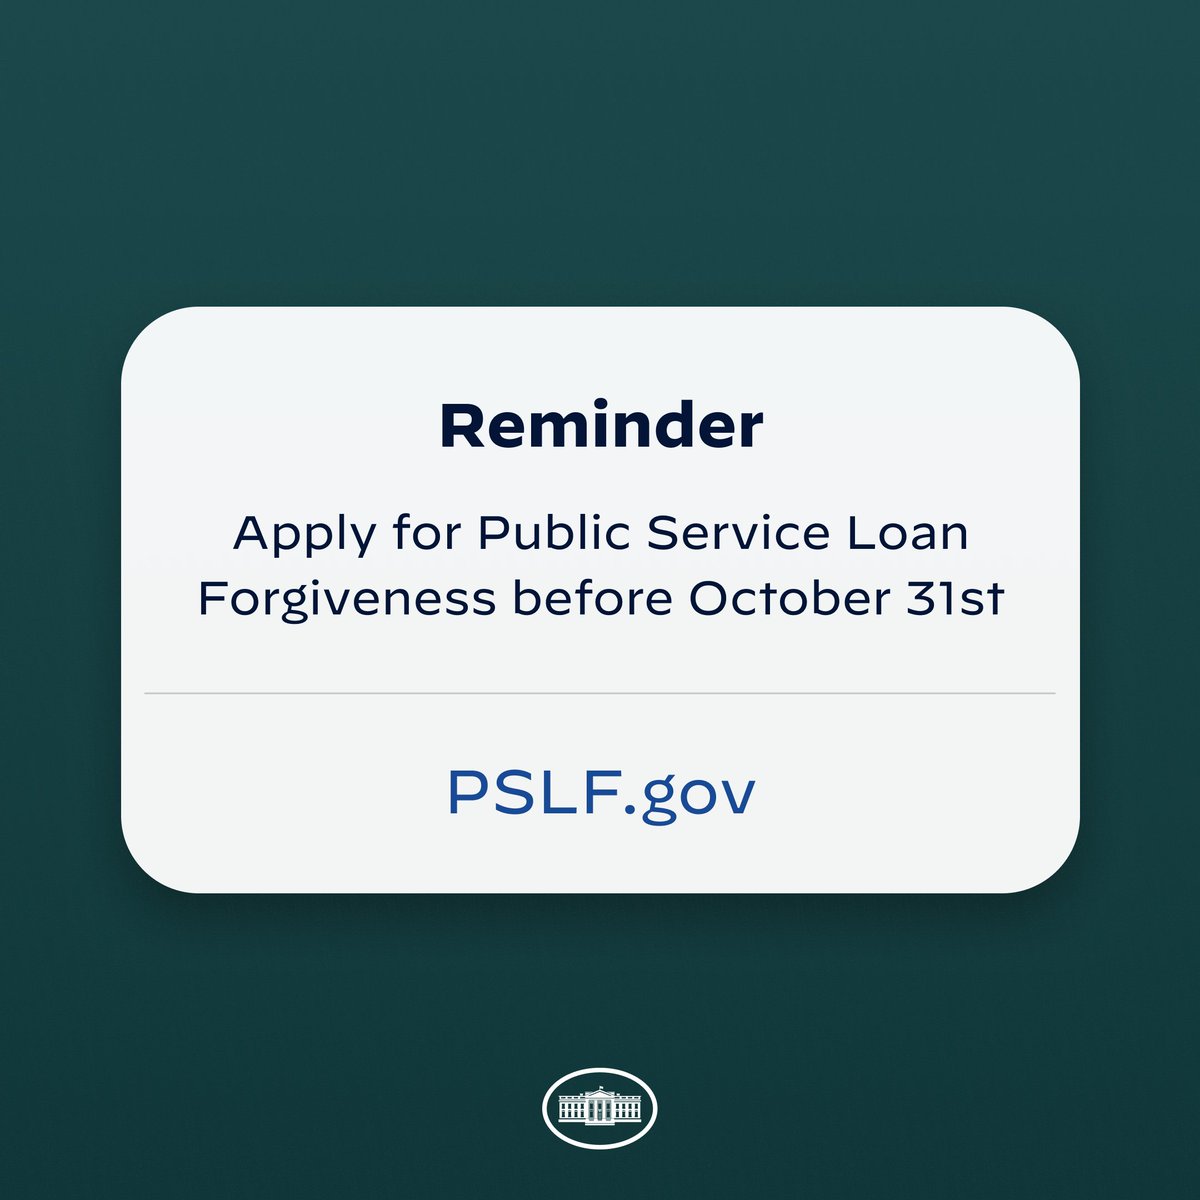 You have 12 days left to apply for the Public Service Loan Forgiveness under the temporary changes. Take these two simple steps to make sure you hit the deadline: